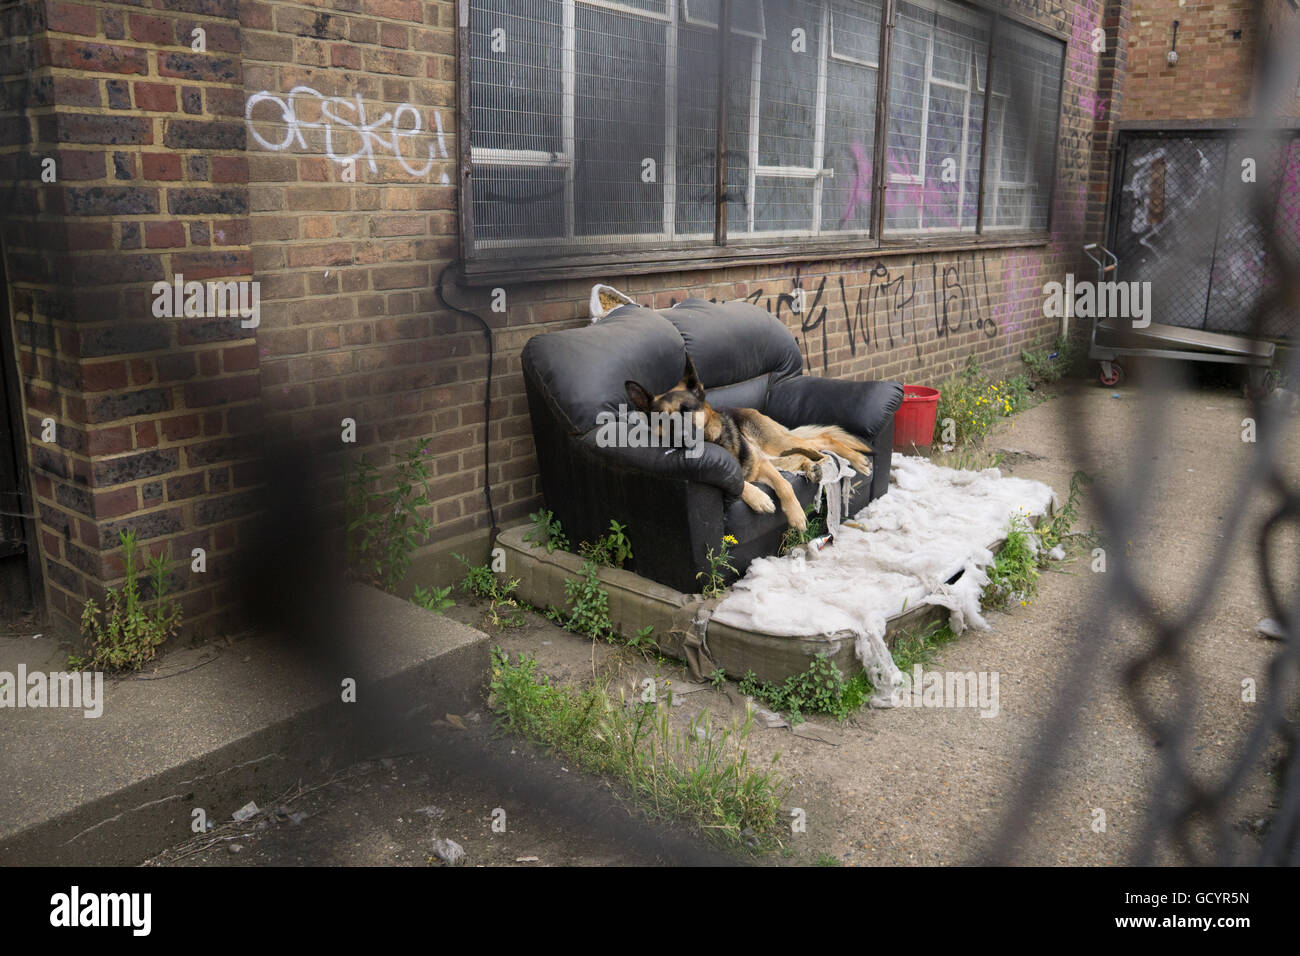 A German Shepherd used as a security guard dog seemingly takes a break on an old settee Stock Photo